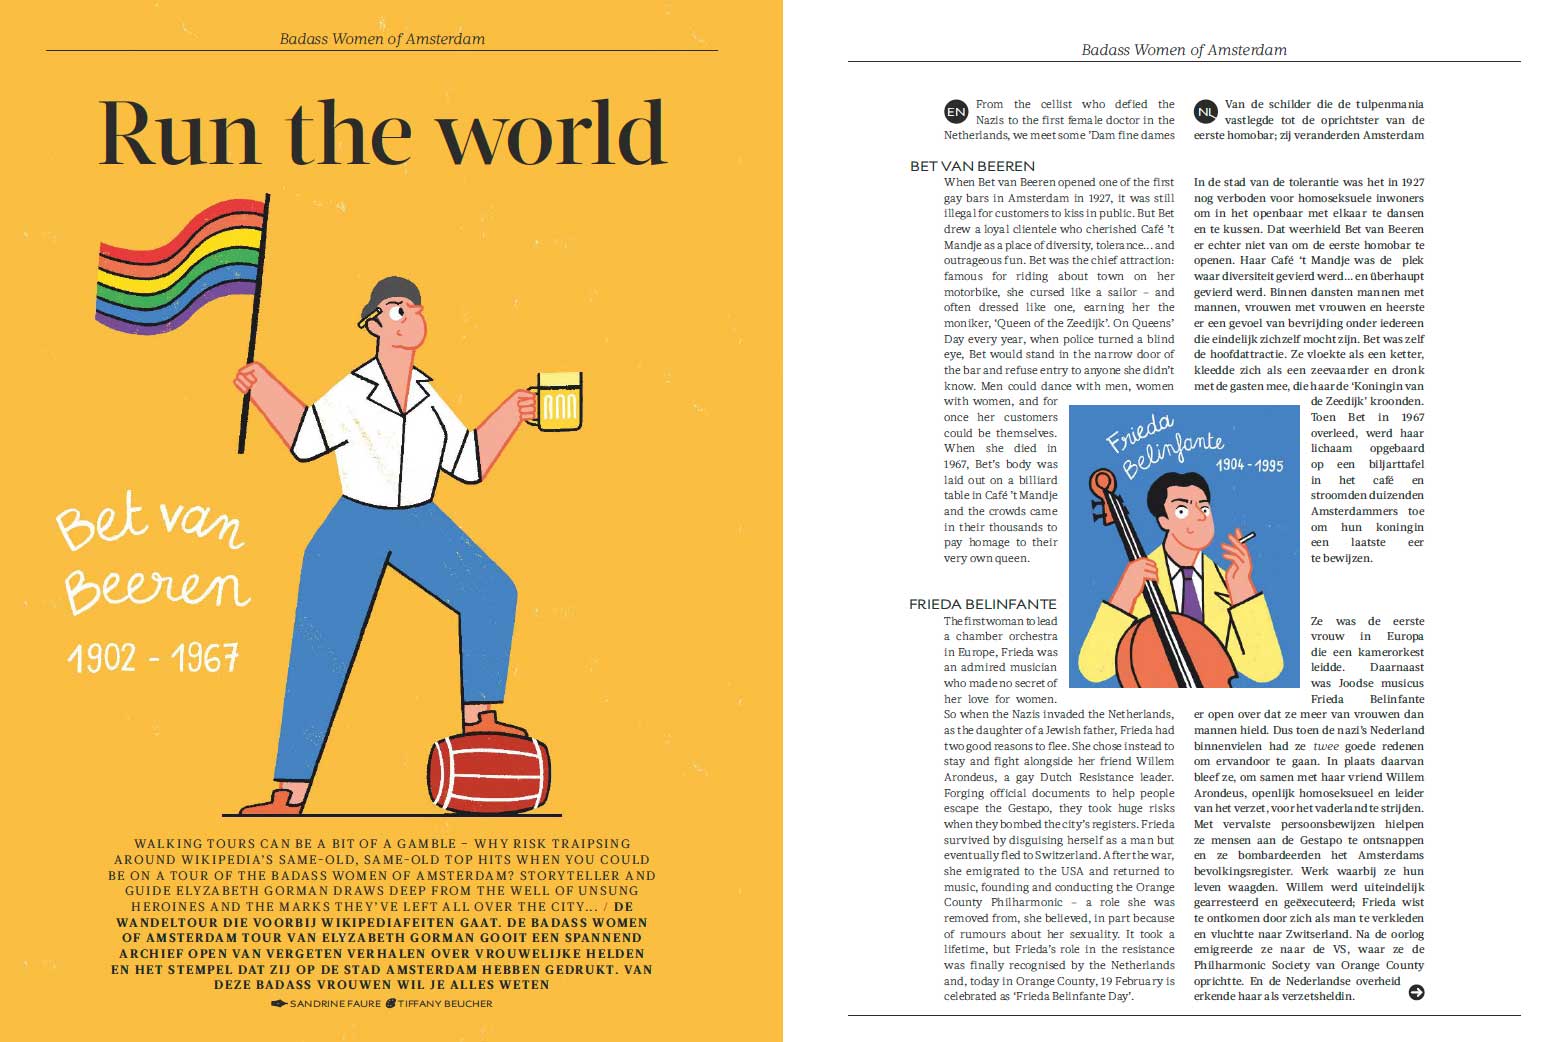 A spread from Eurostar's Metropolitan magazine. The article is titled 'Run the world' and shows an illustration of a person holding a Pride flag with their foot on a beer barrel.